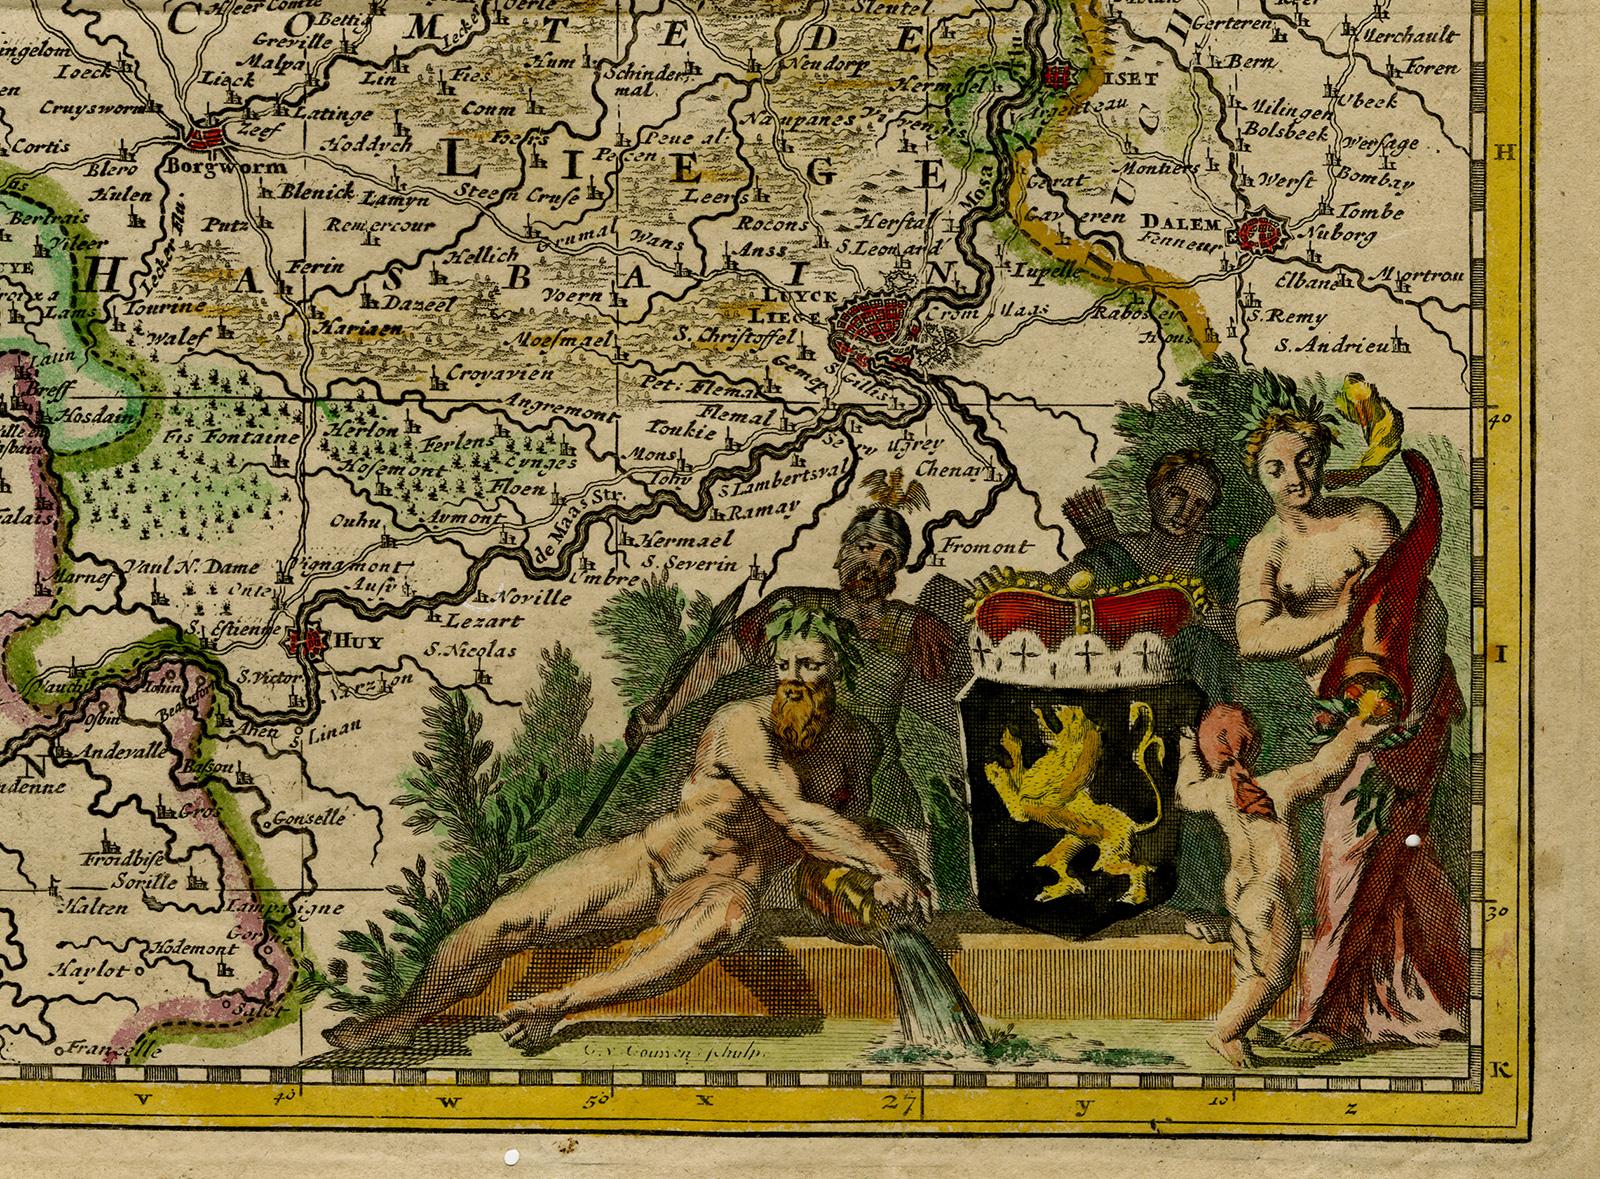 Antique map of Duchy of Brabant by Visscher - Handcoloured engraving - 17th c. - Old Masters Print by Nicolaus Visscher